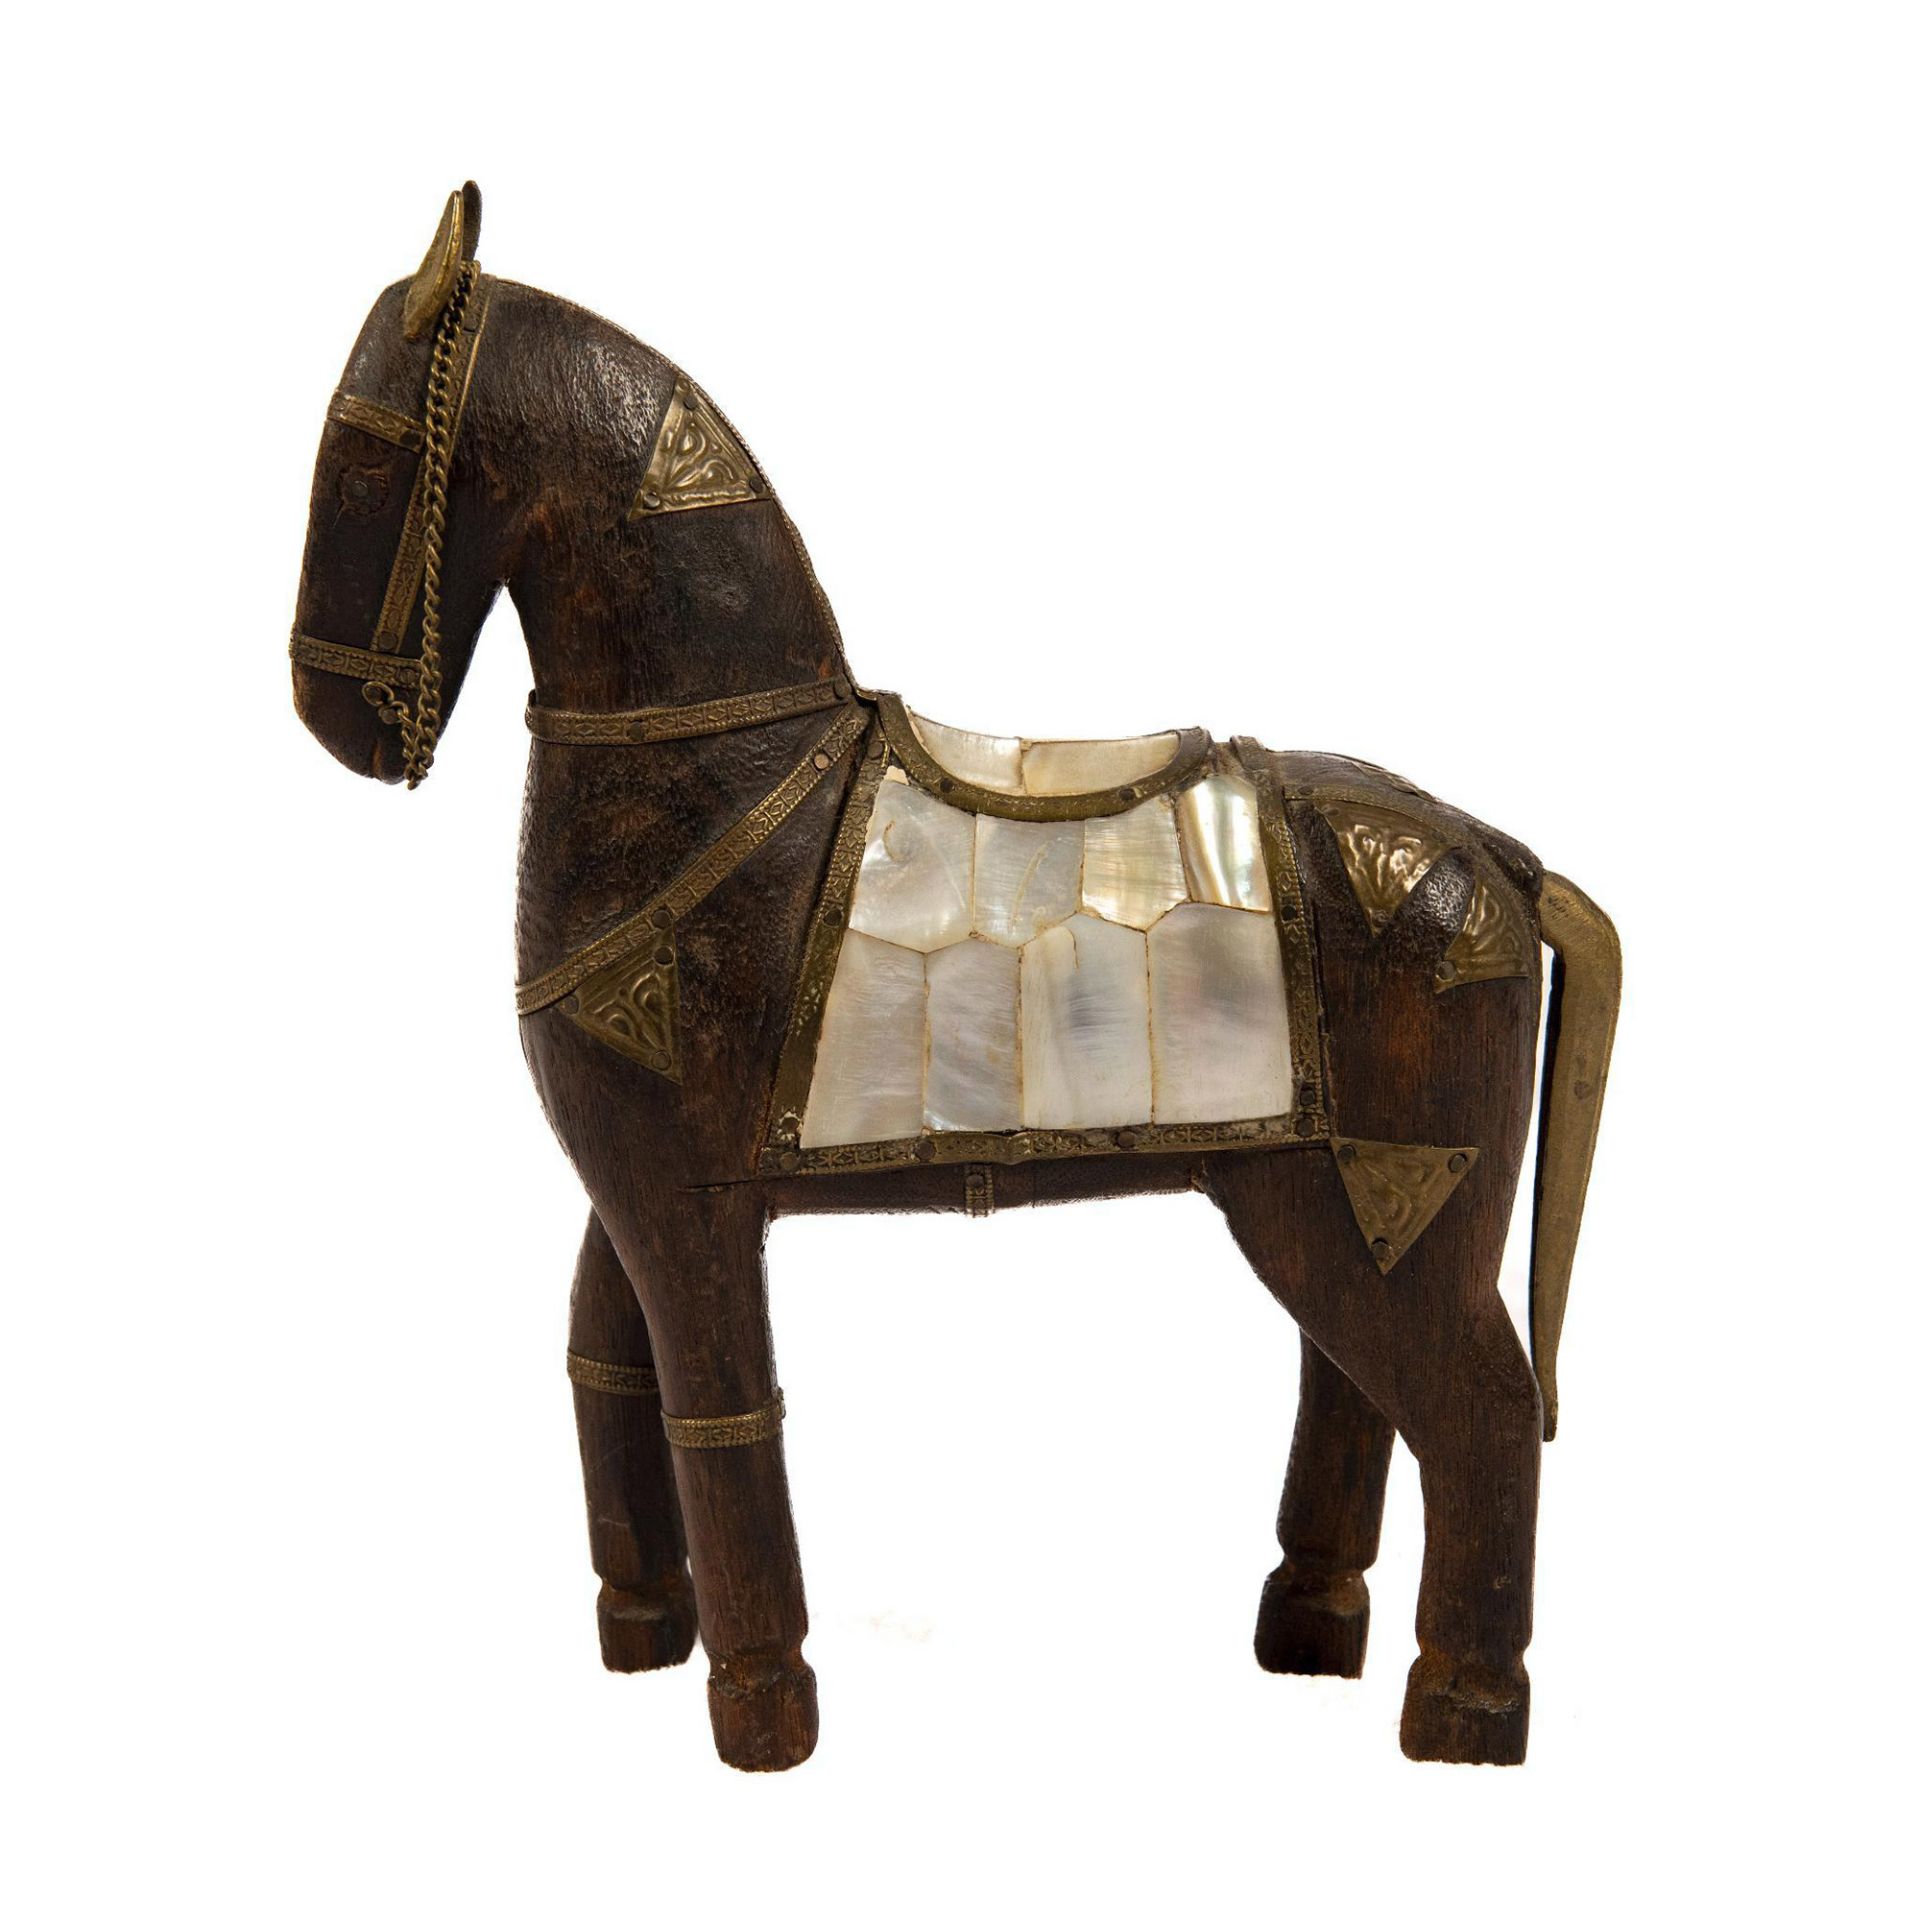 Vintage Wood, Brass, & Mother-of-Pearl War Horse Carving - Image 2 of 4